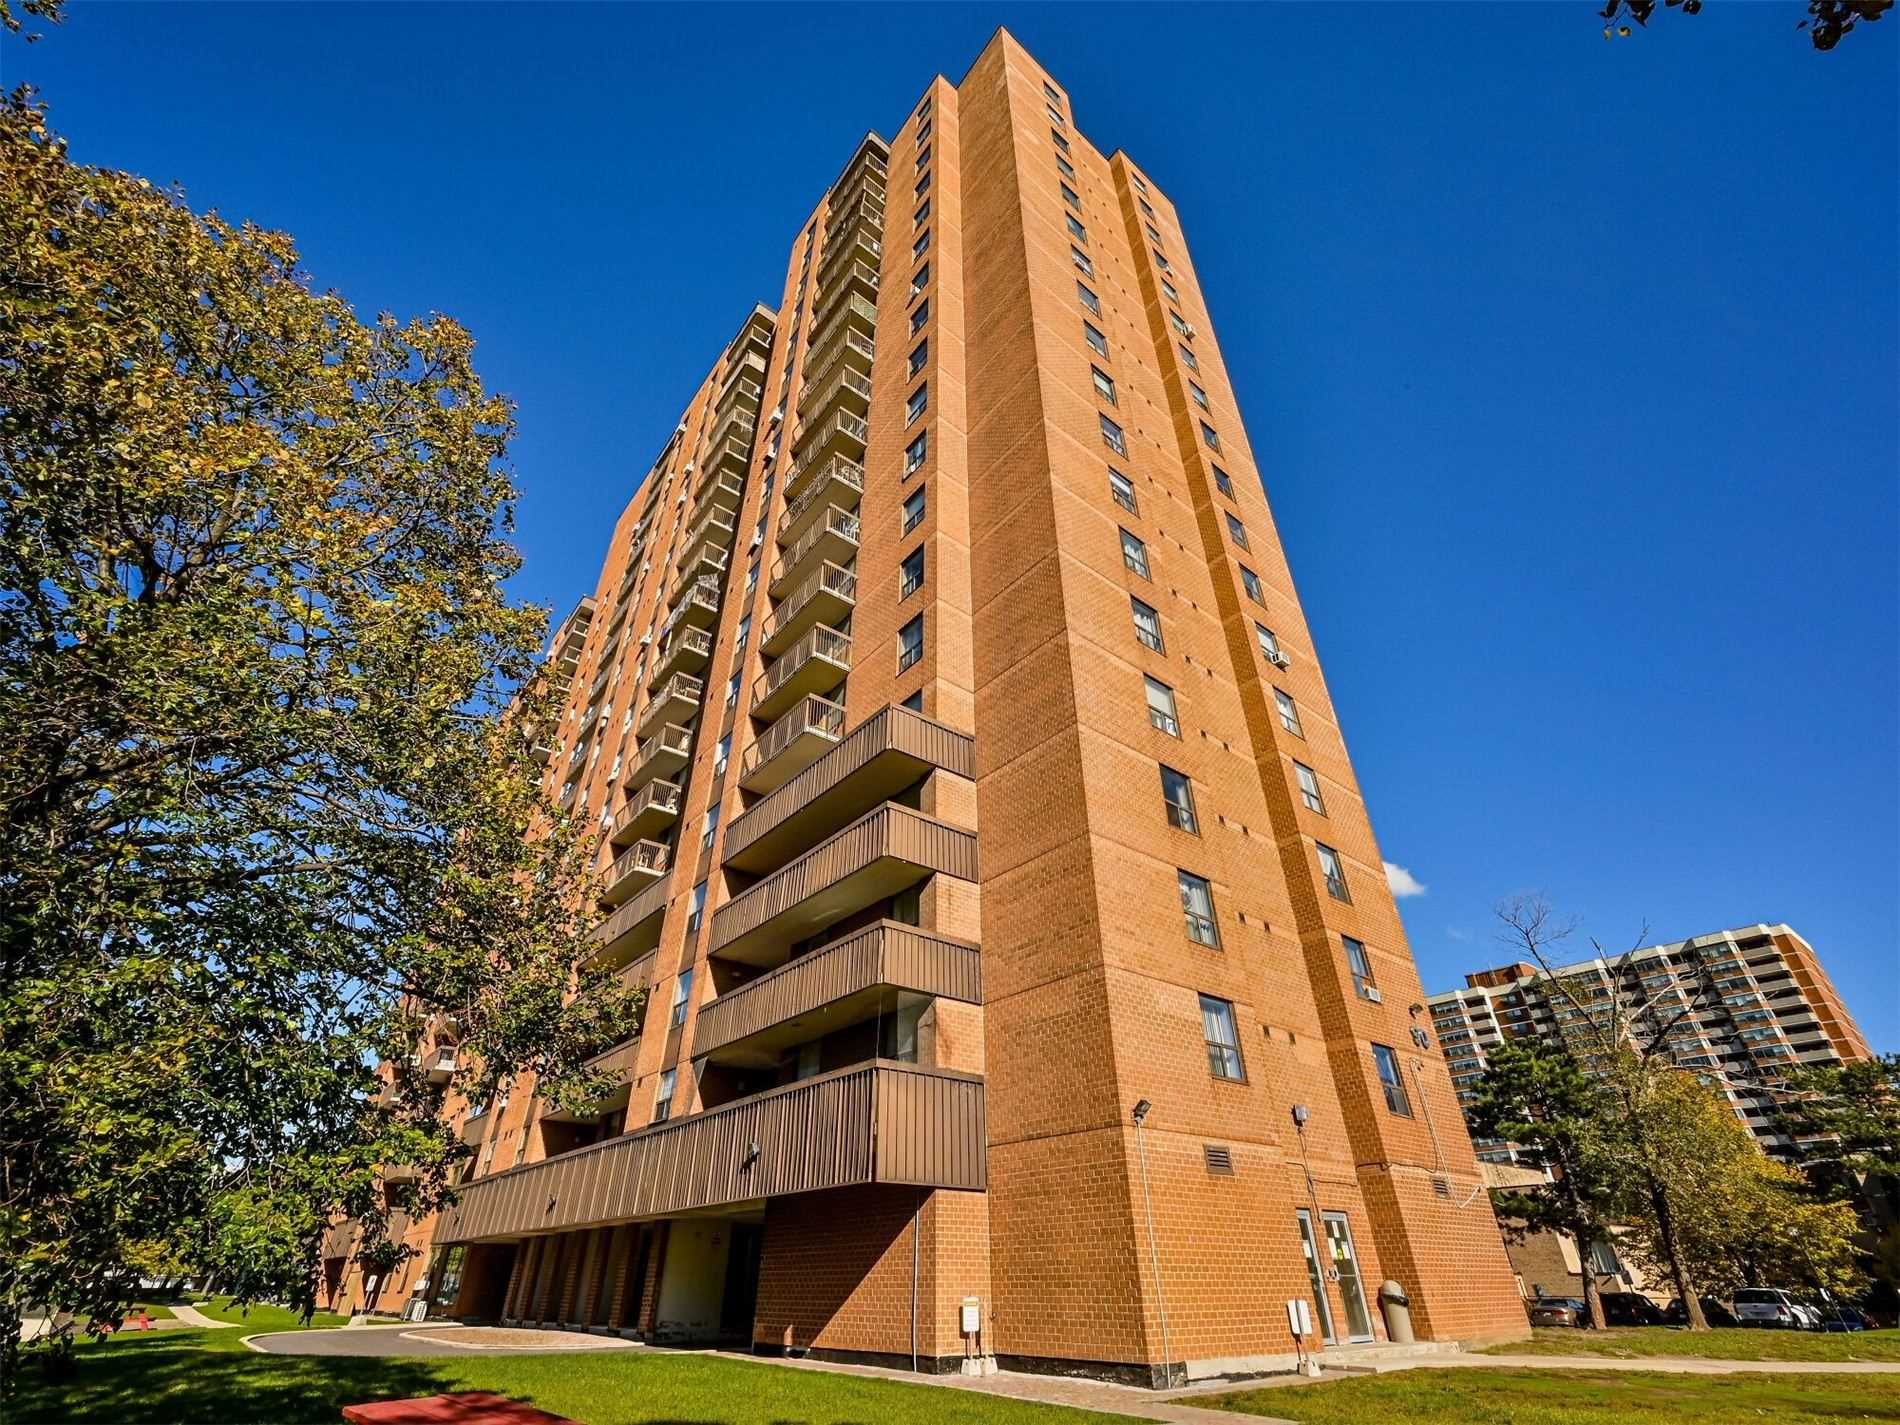 90 Ling Rd. This condo at Morningside Estates Condos is located in  Scarborough, Toronto - image #1 of 2 by Strata.ca